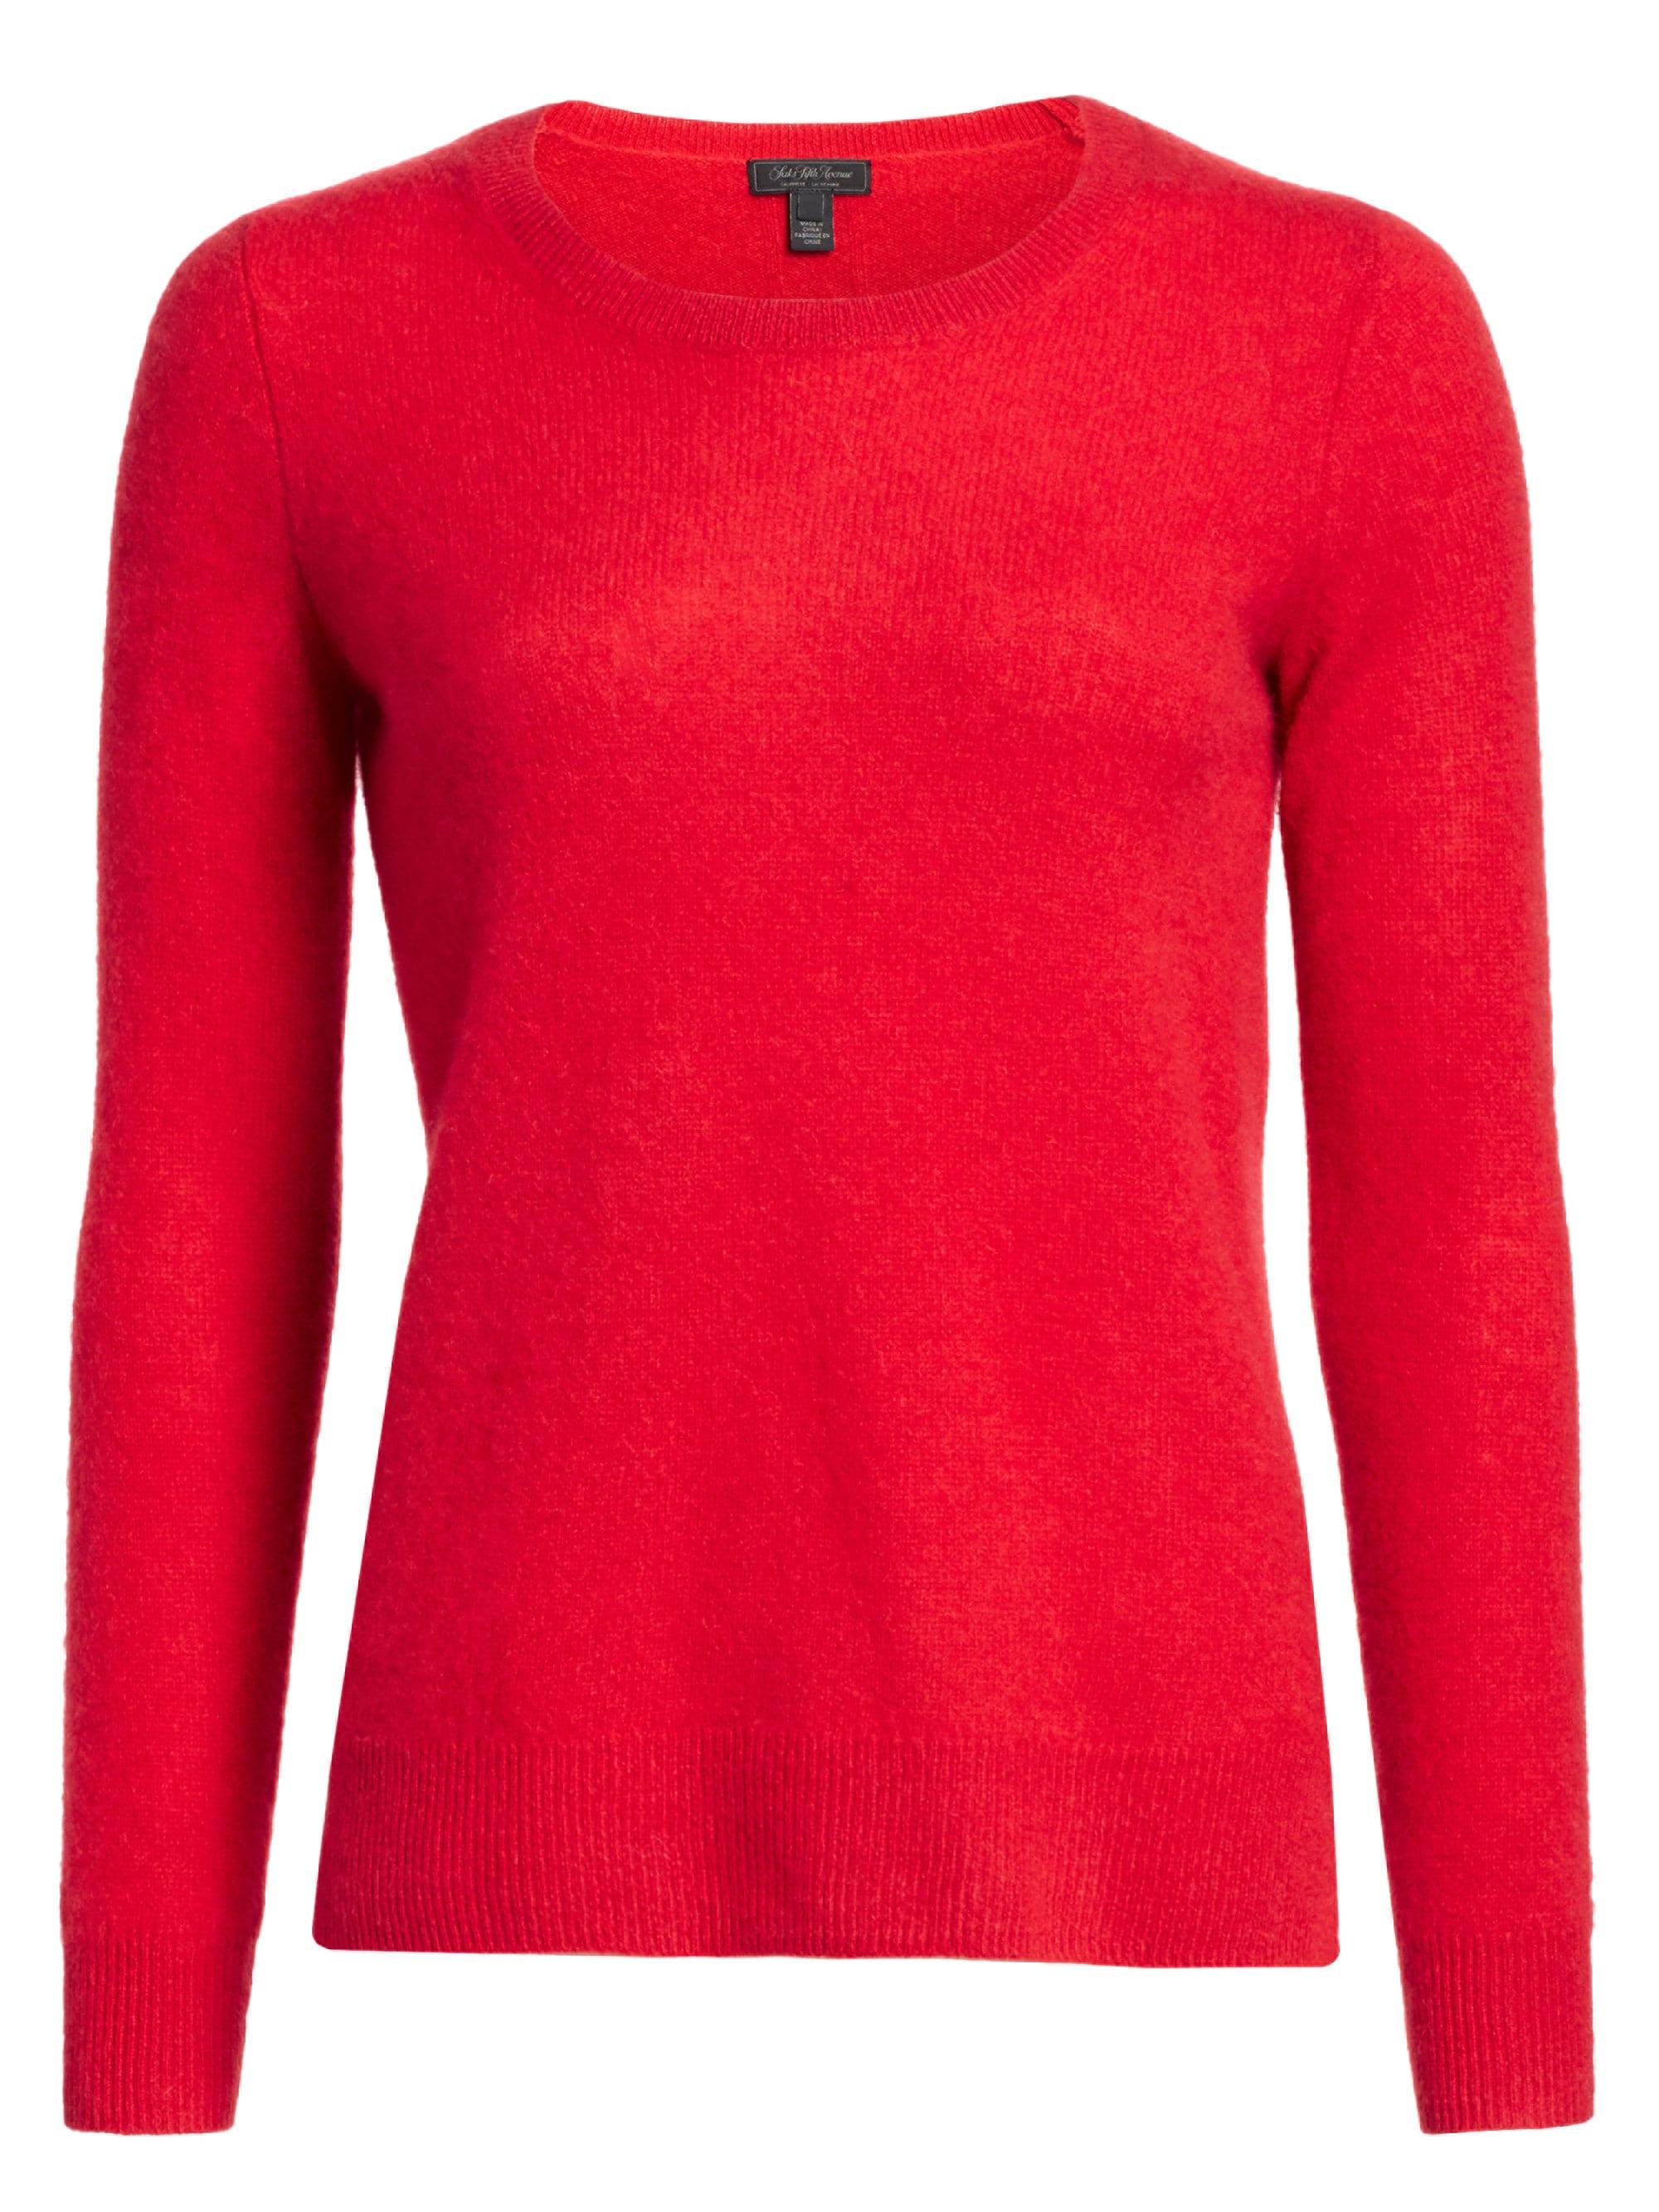 Saks Fifth Avenue Collection Featherweight Cashmere Sweater in Red - Lyst